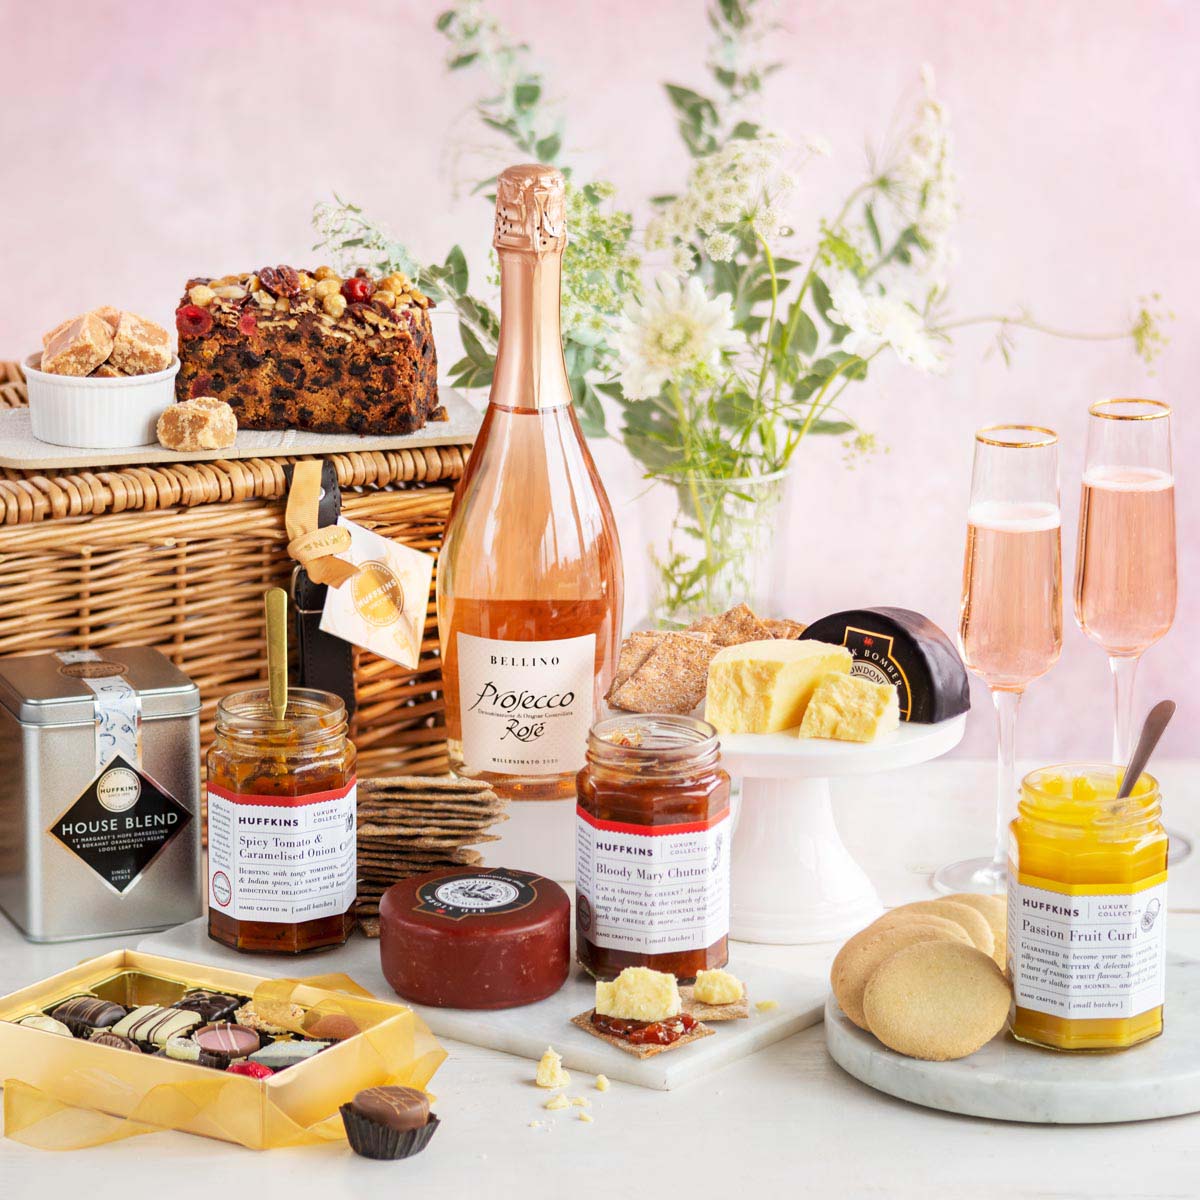 Huffkins cheese and Prosecco hamper filled with sweet and savoury goodies